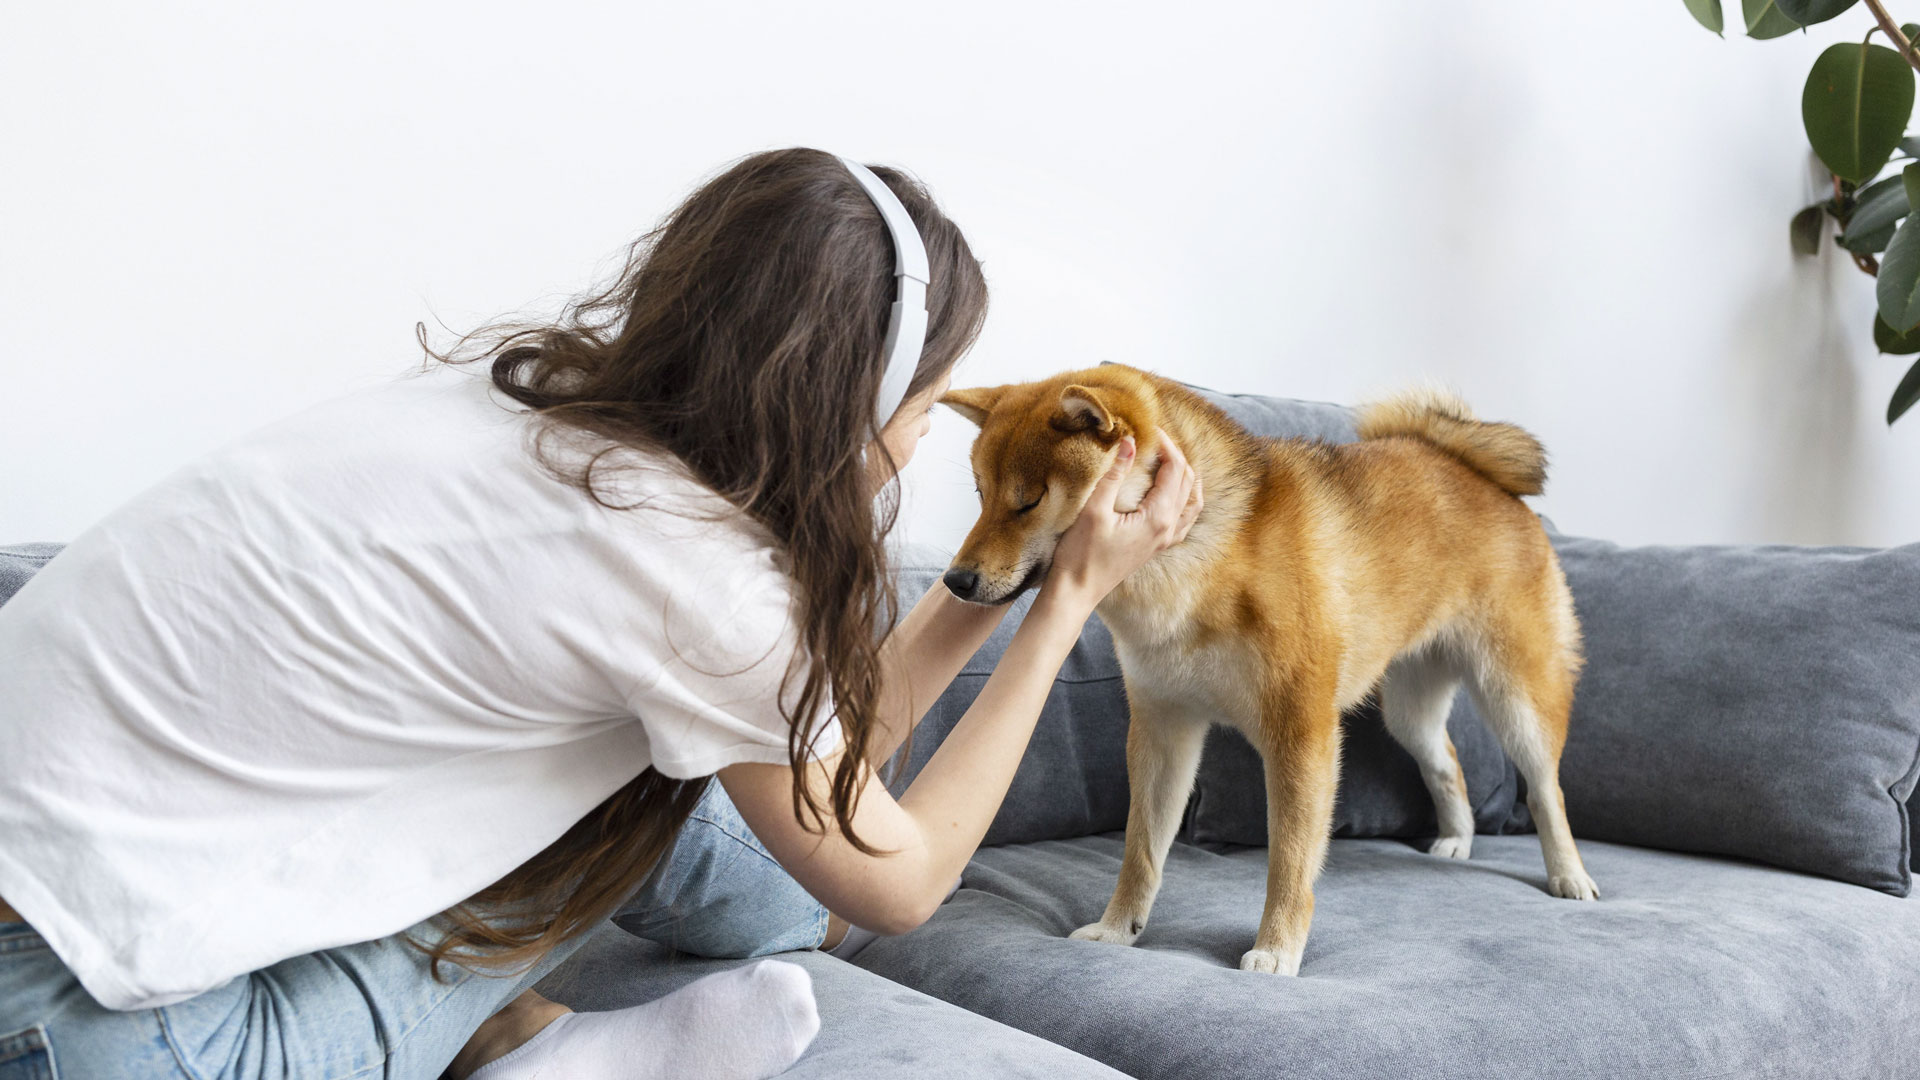 woman spending time together with her dog